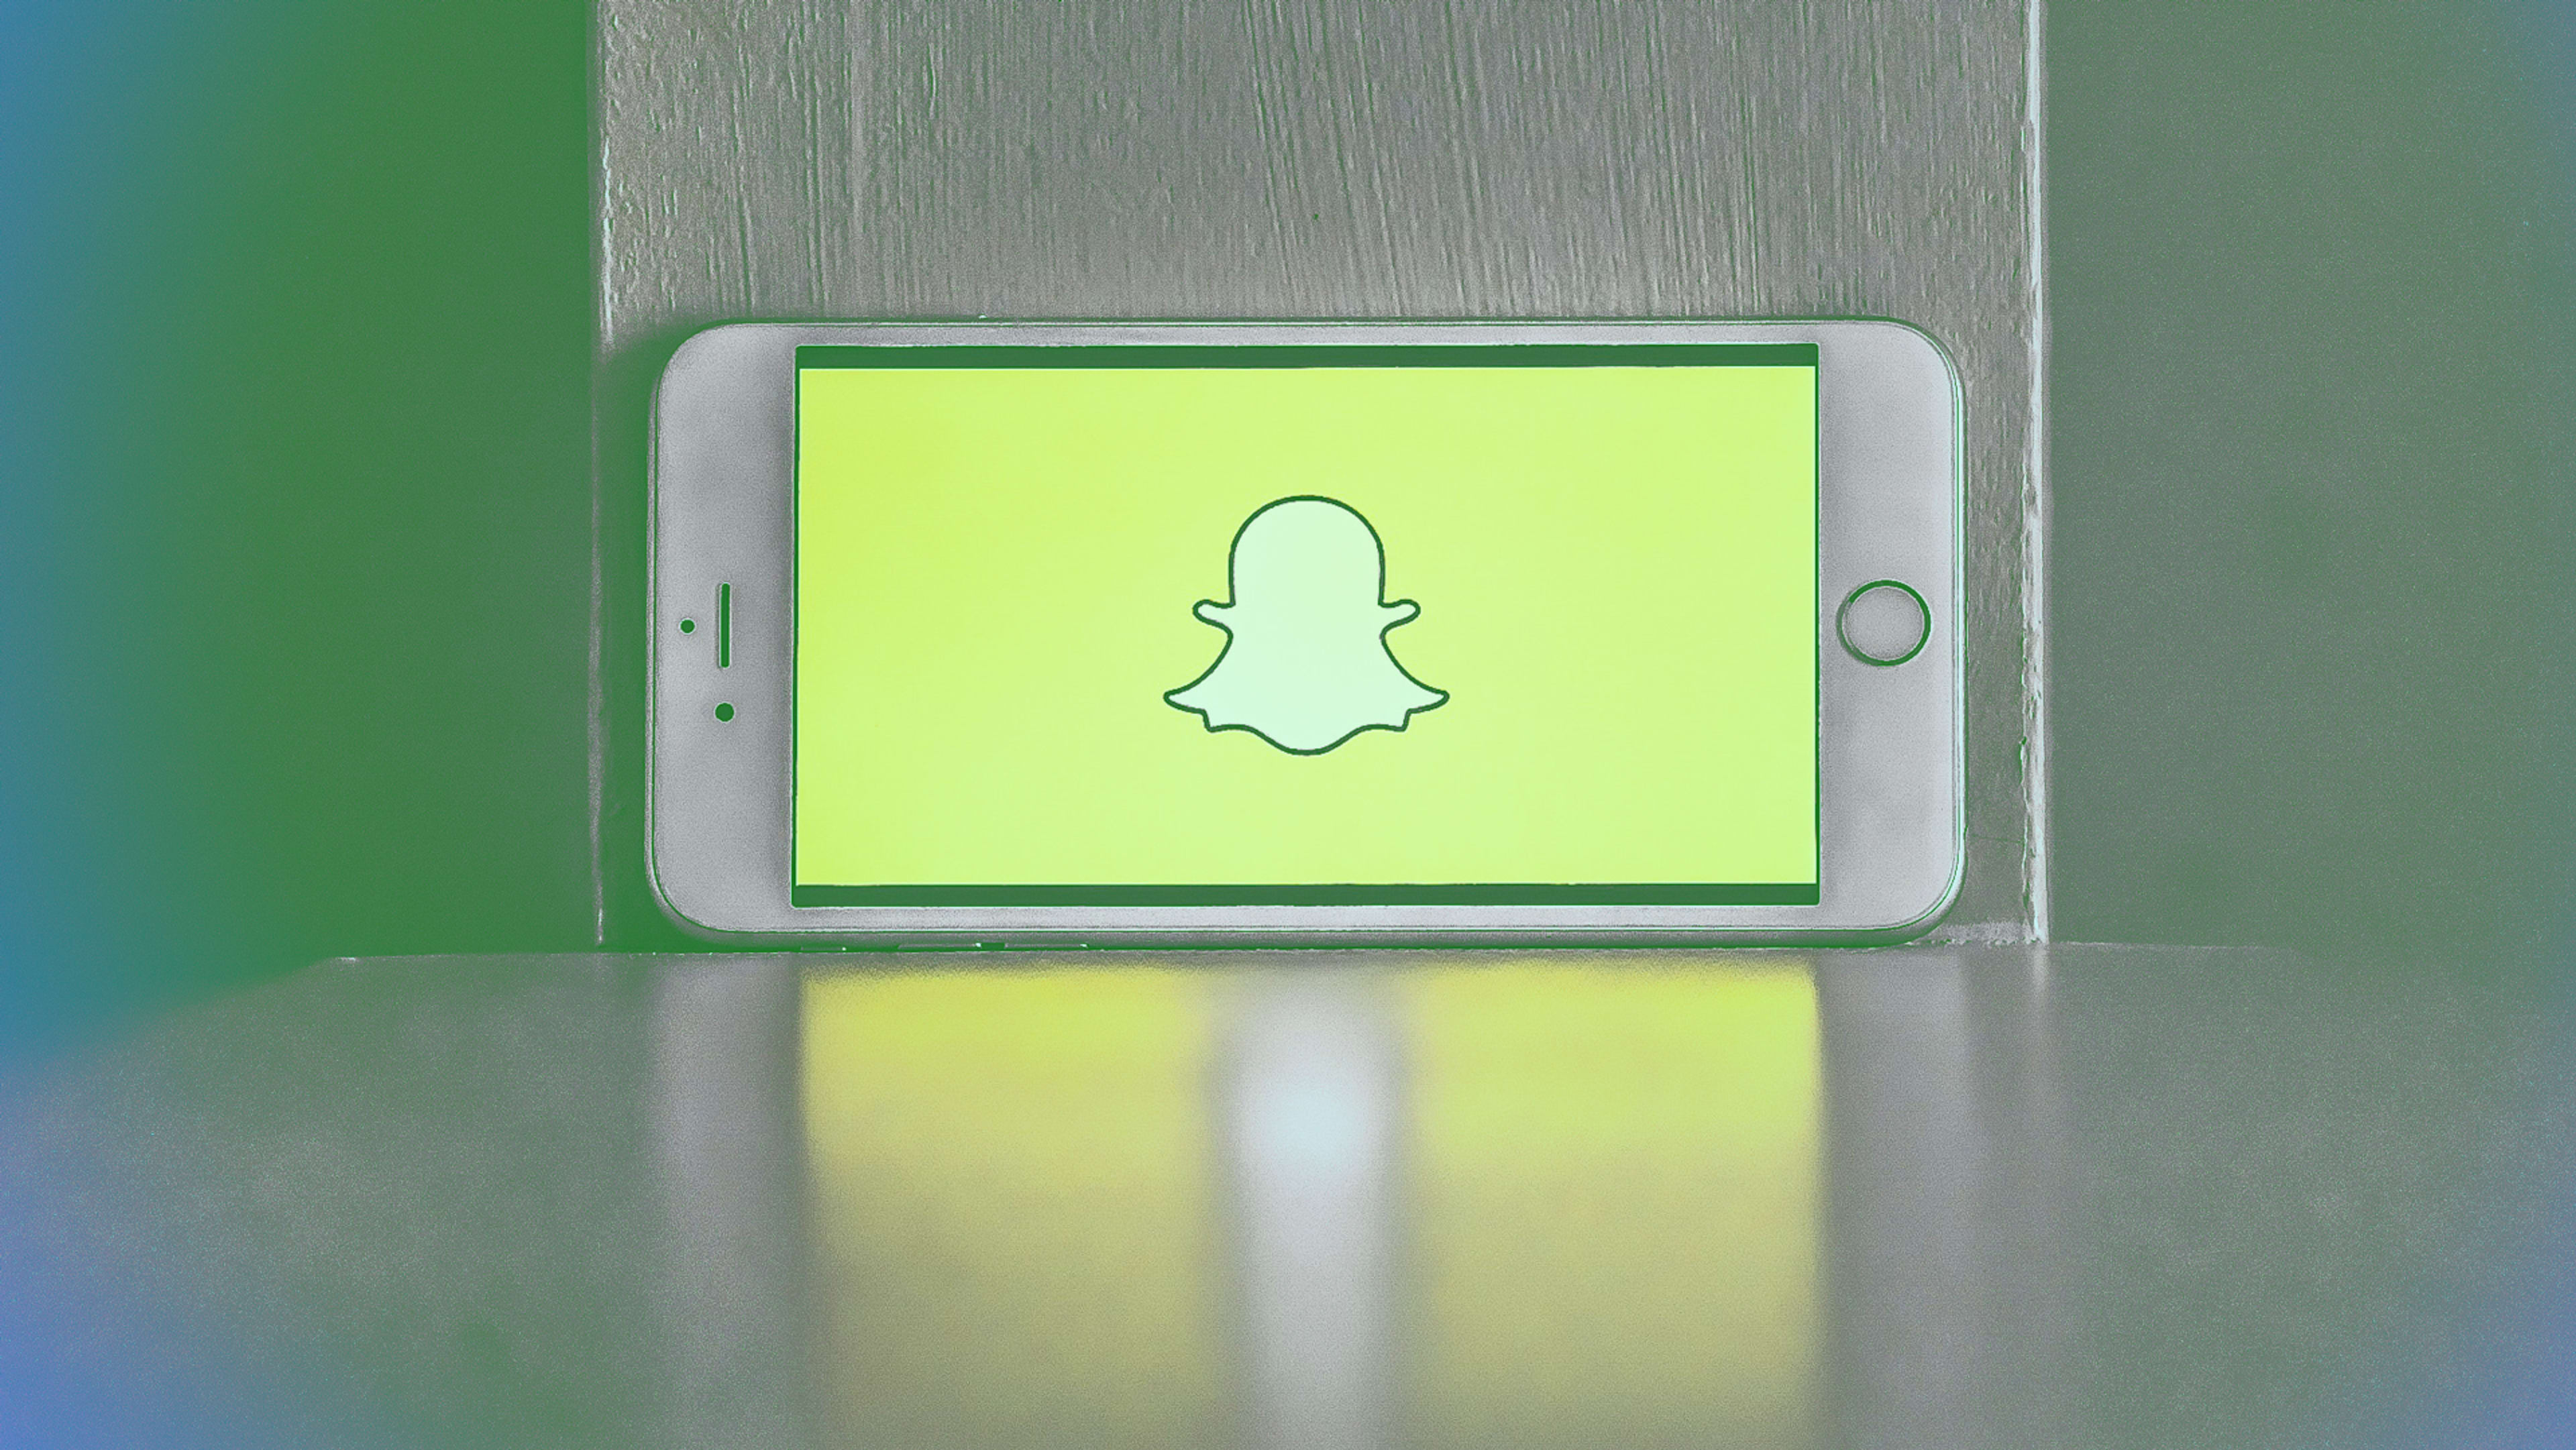 For the first time ever, Snapchat is expected to lose U.S. users this year